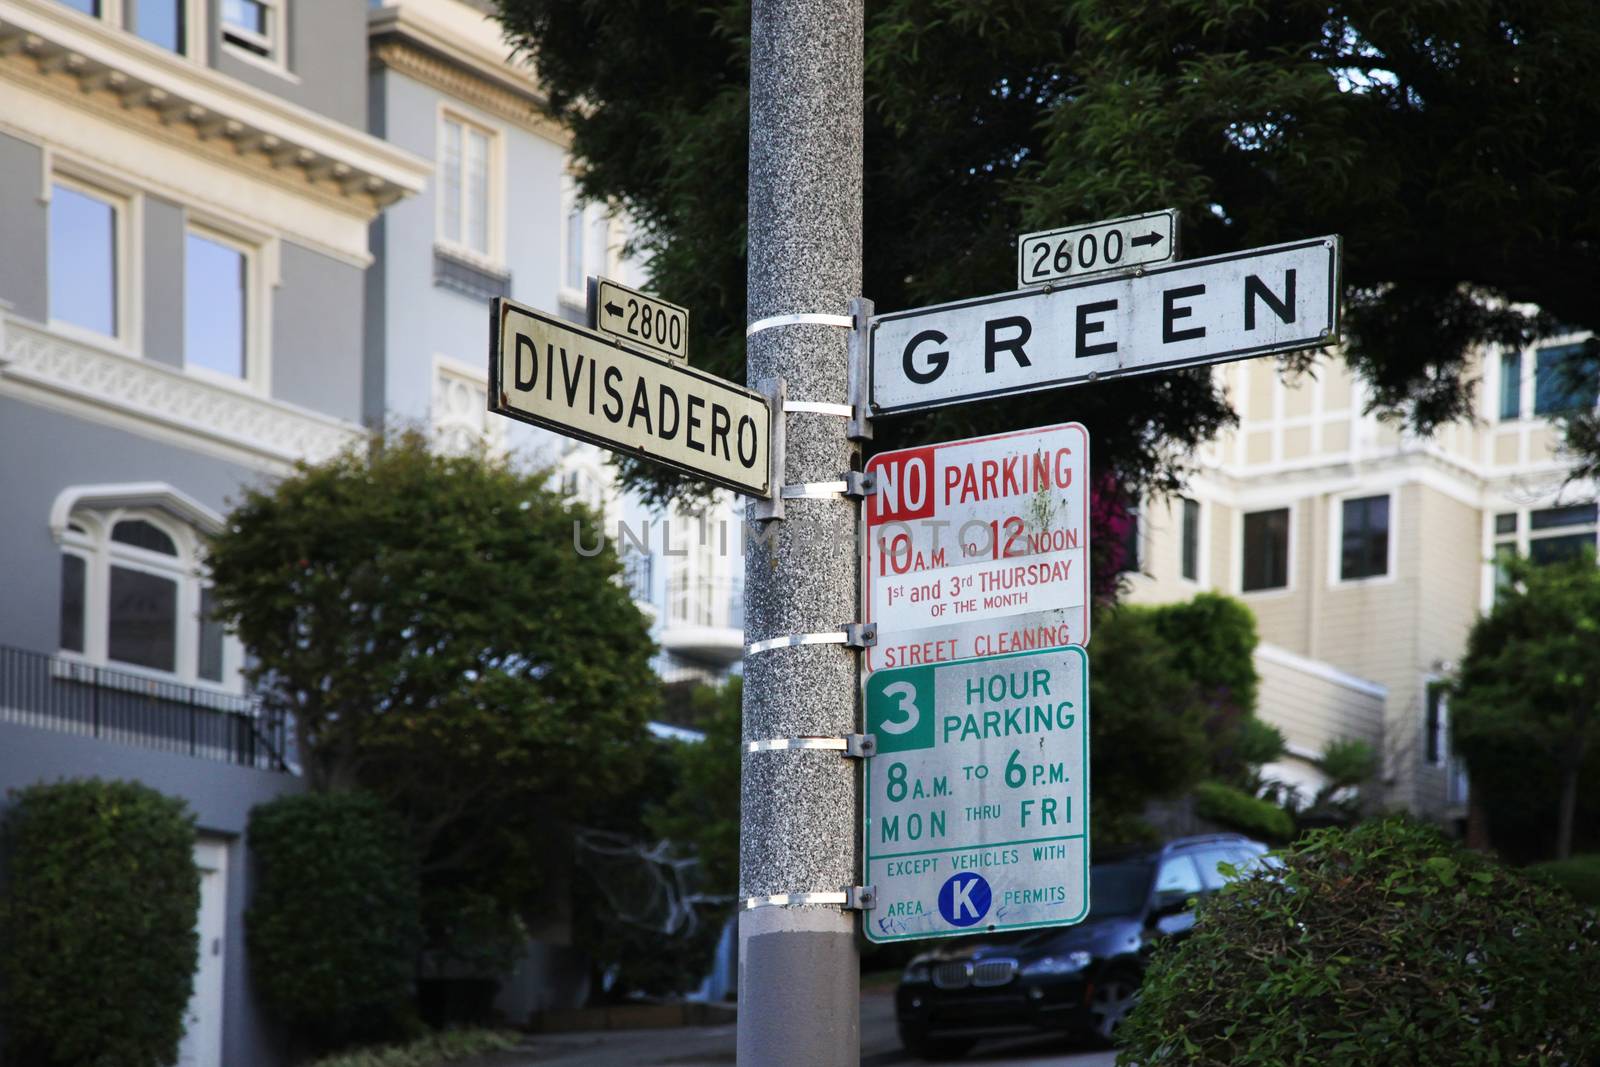 At the intersection of Divisadero Street and Green Street in San Francisco, California.